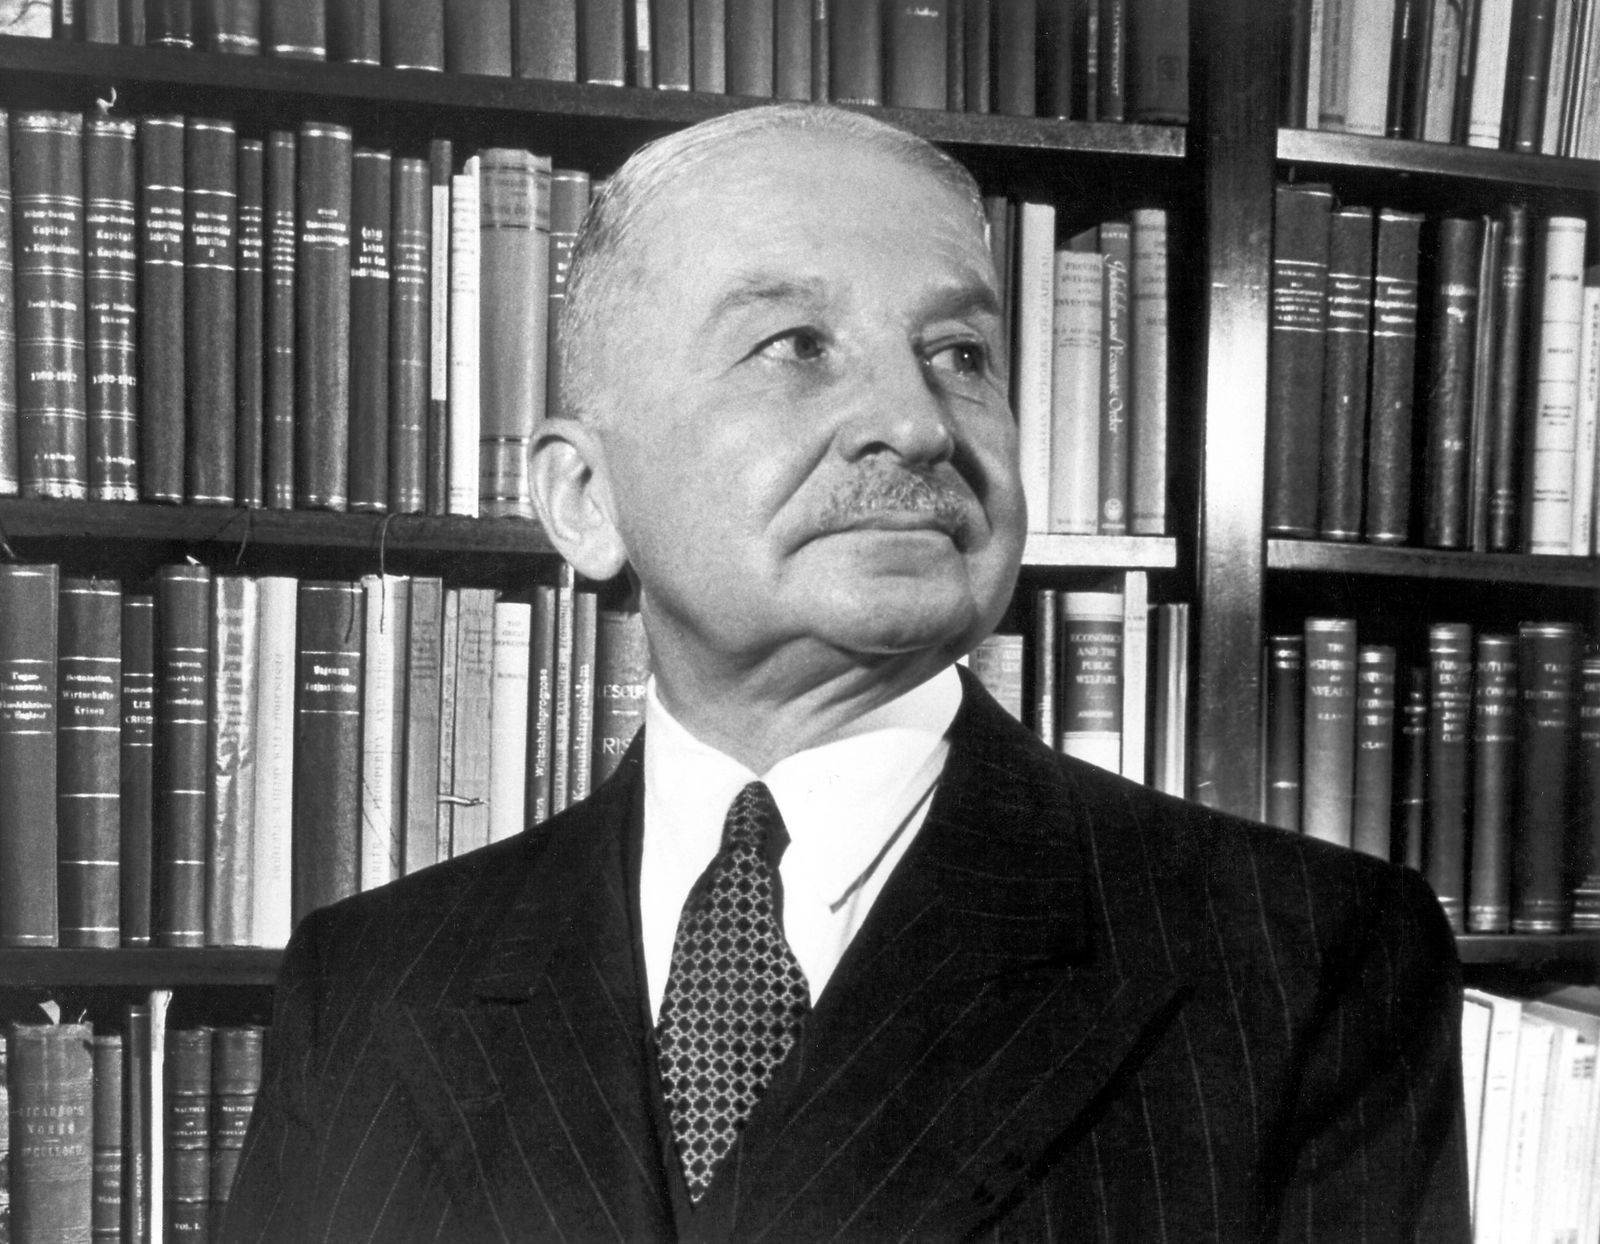 Readings from The Mises Circle